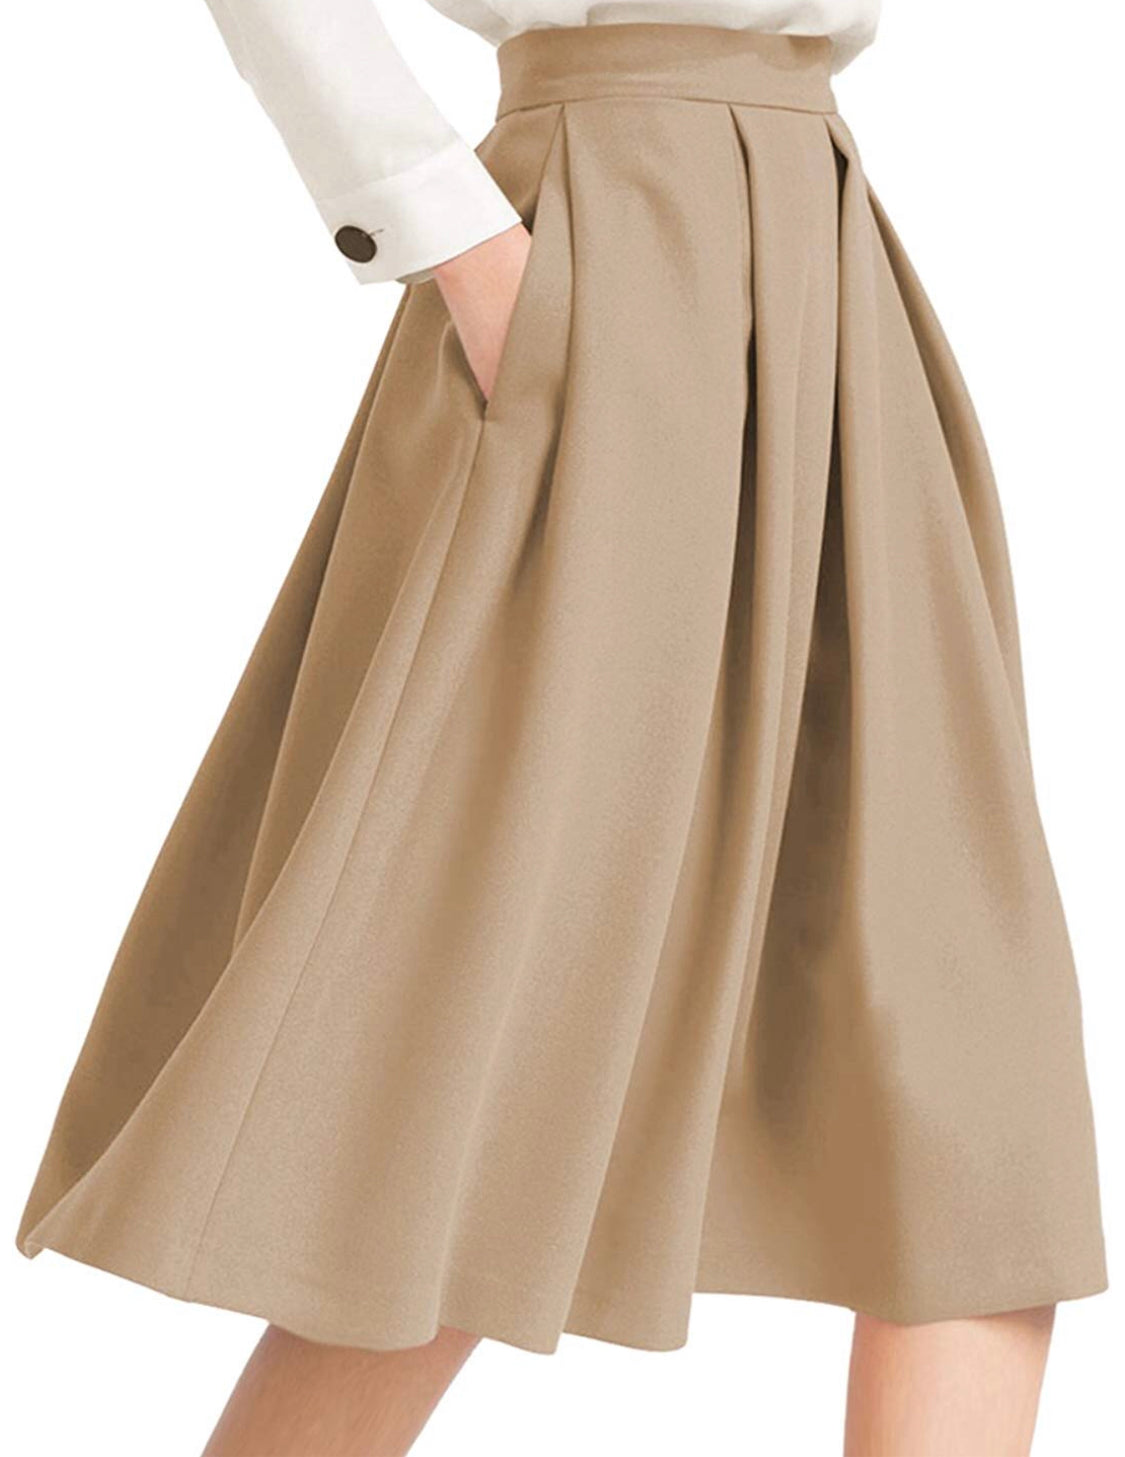 Soft and Delicate Midi Skirt